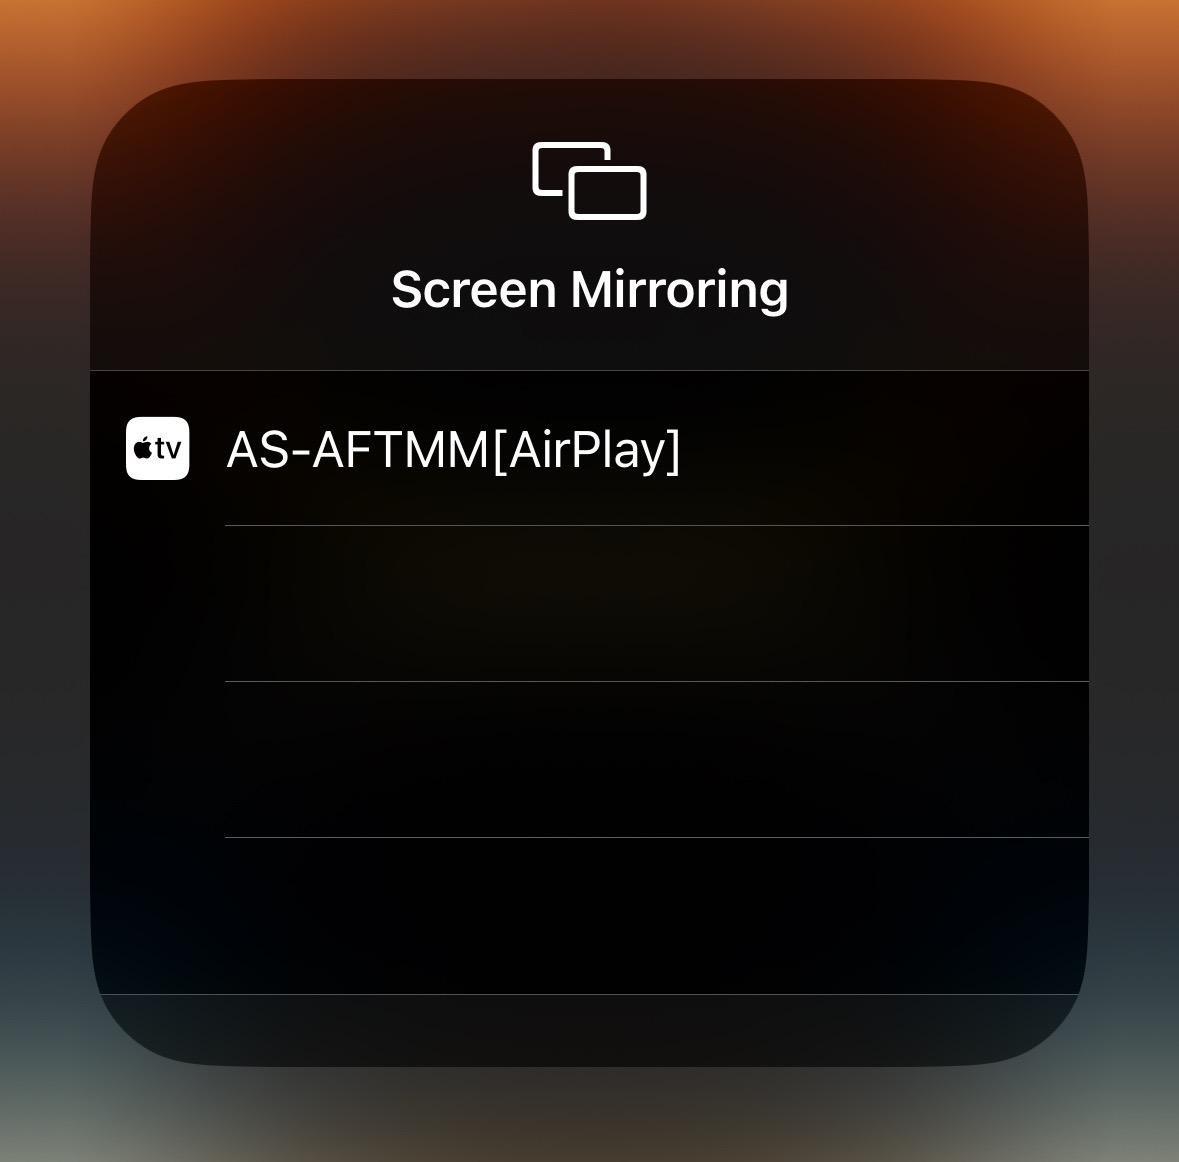 airscreen app name appears on an iphone airplay list